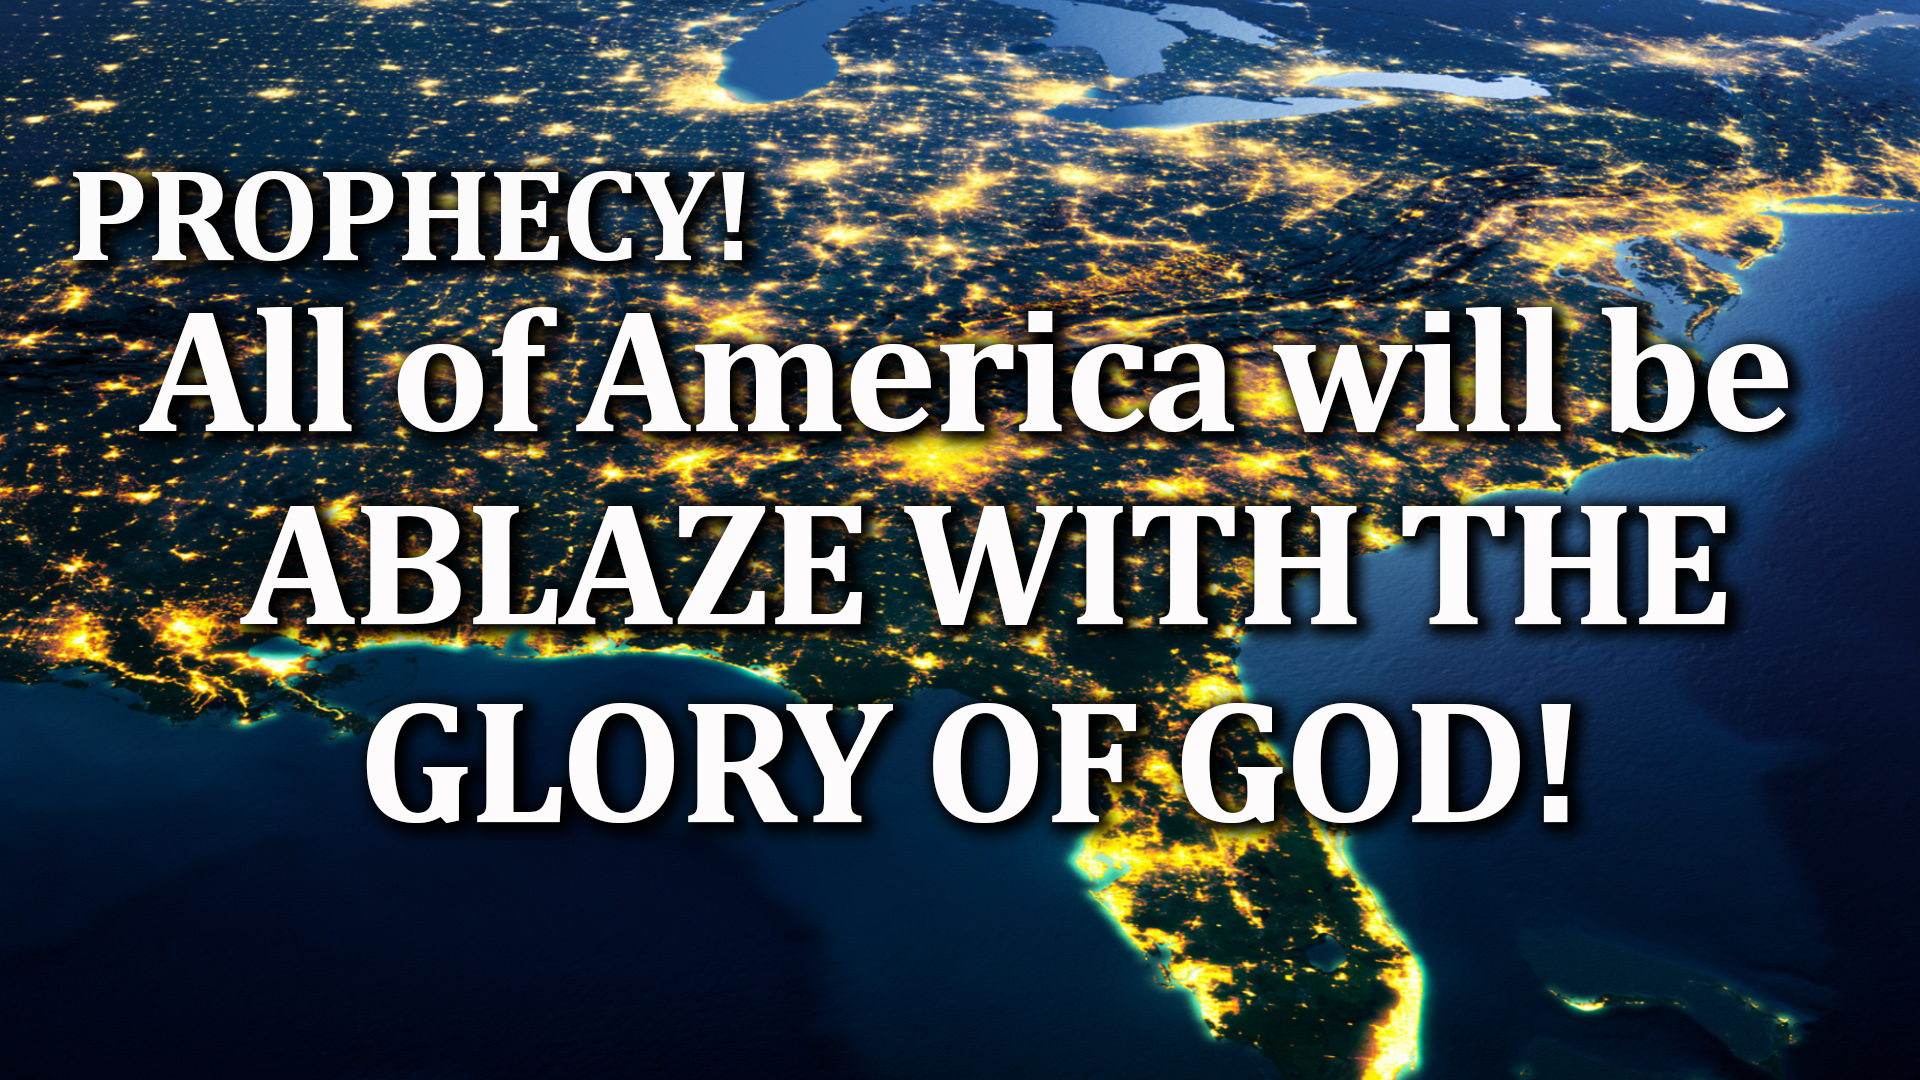 11-30-21 Propecy America all ablaze with the glory of God